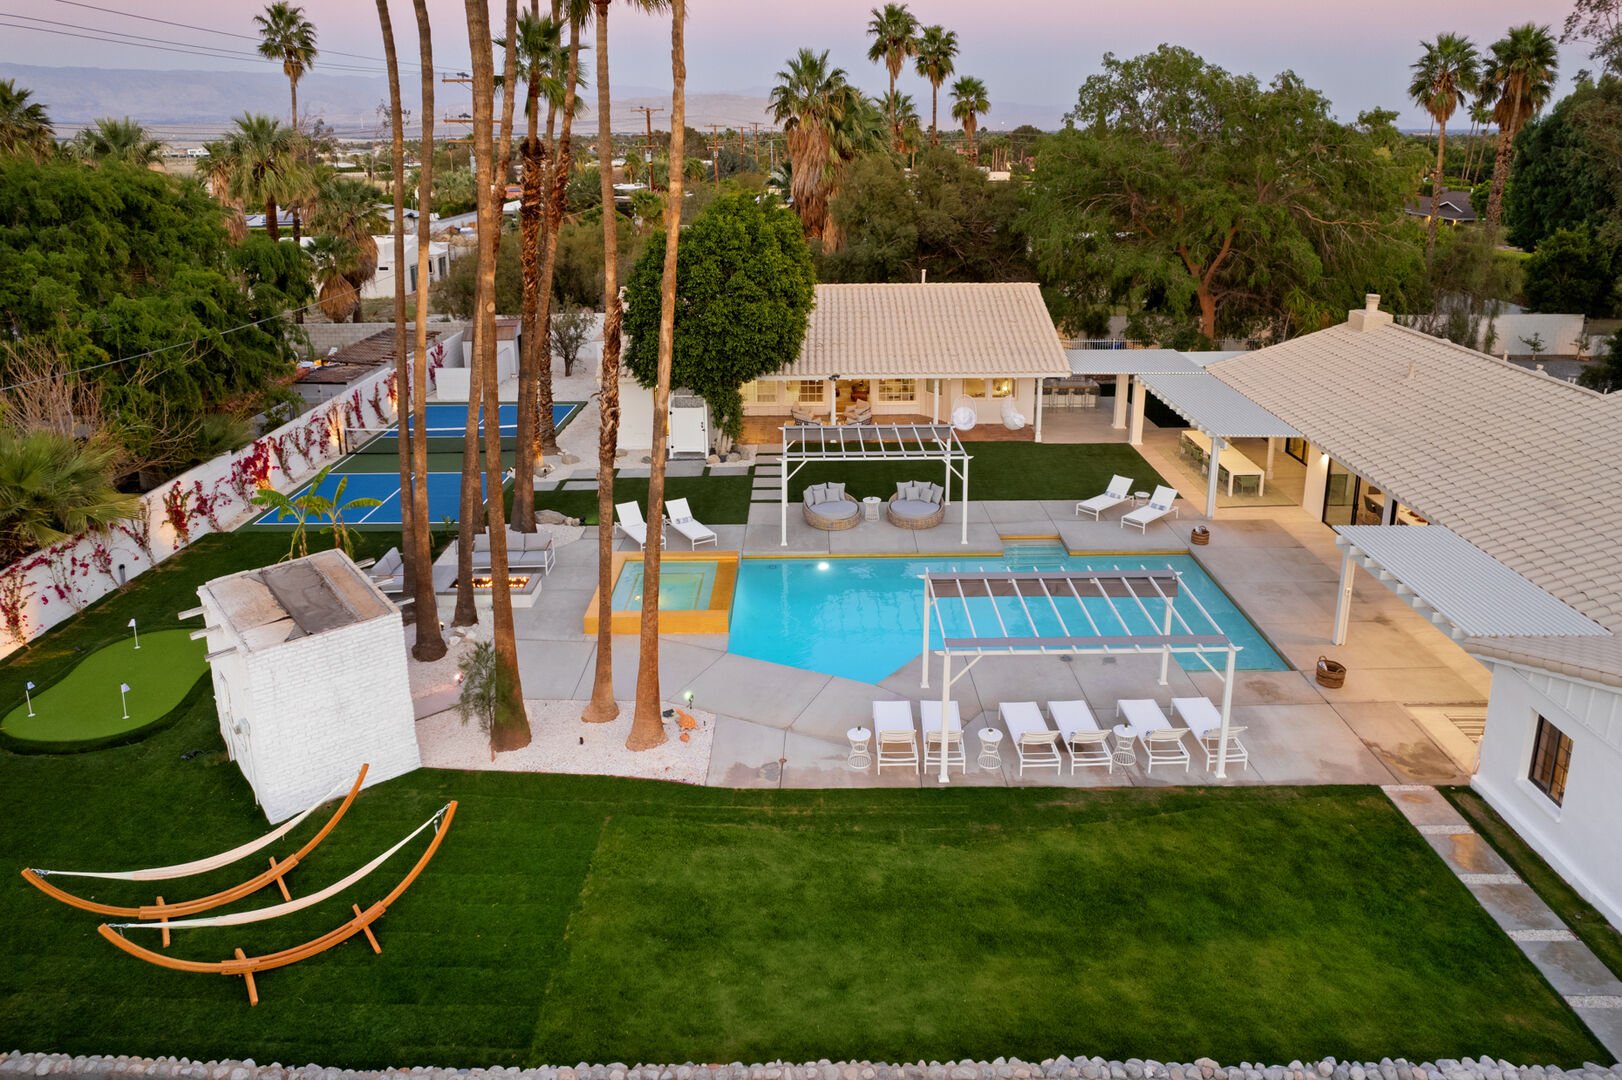 Welcome to Solaris, Your Palm Springs Sunny Getaway! (Sports court is not available for guest use)